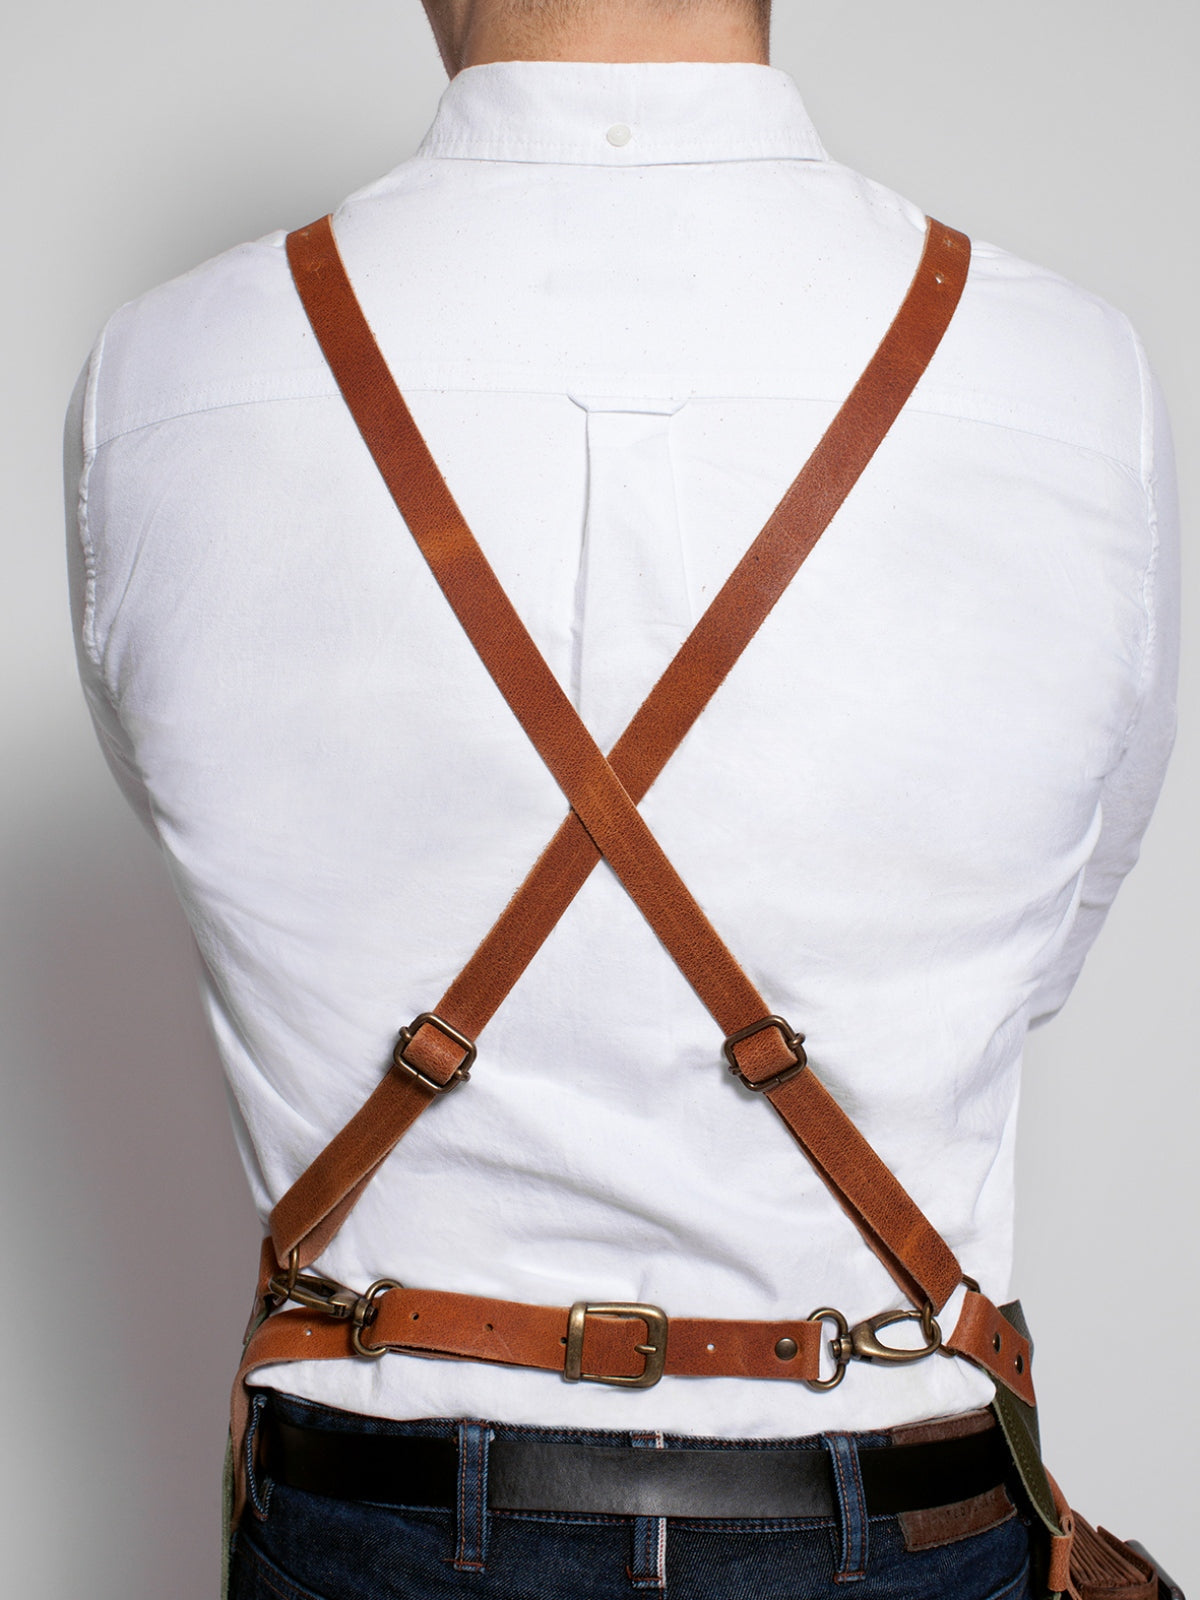 Leather Apron Cross Strap Deluxe Marine by STW -  ChefsCotton